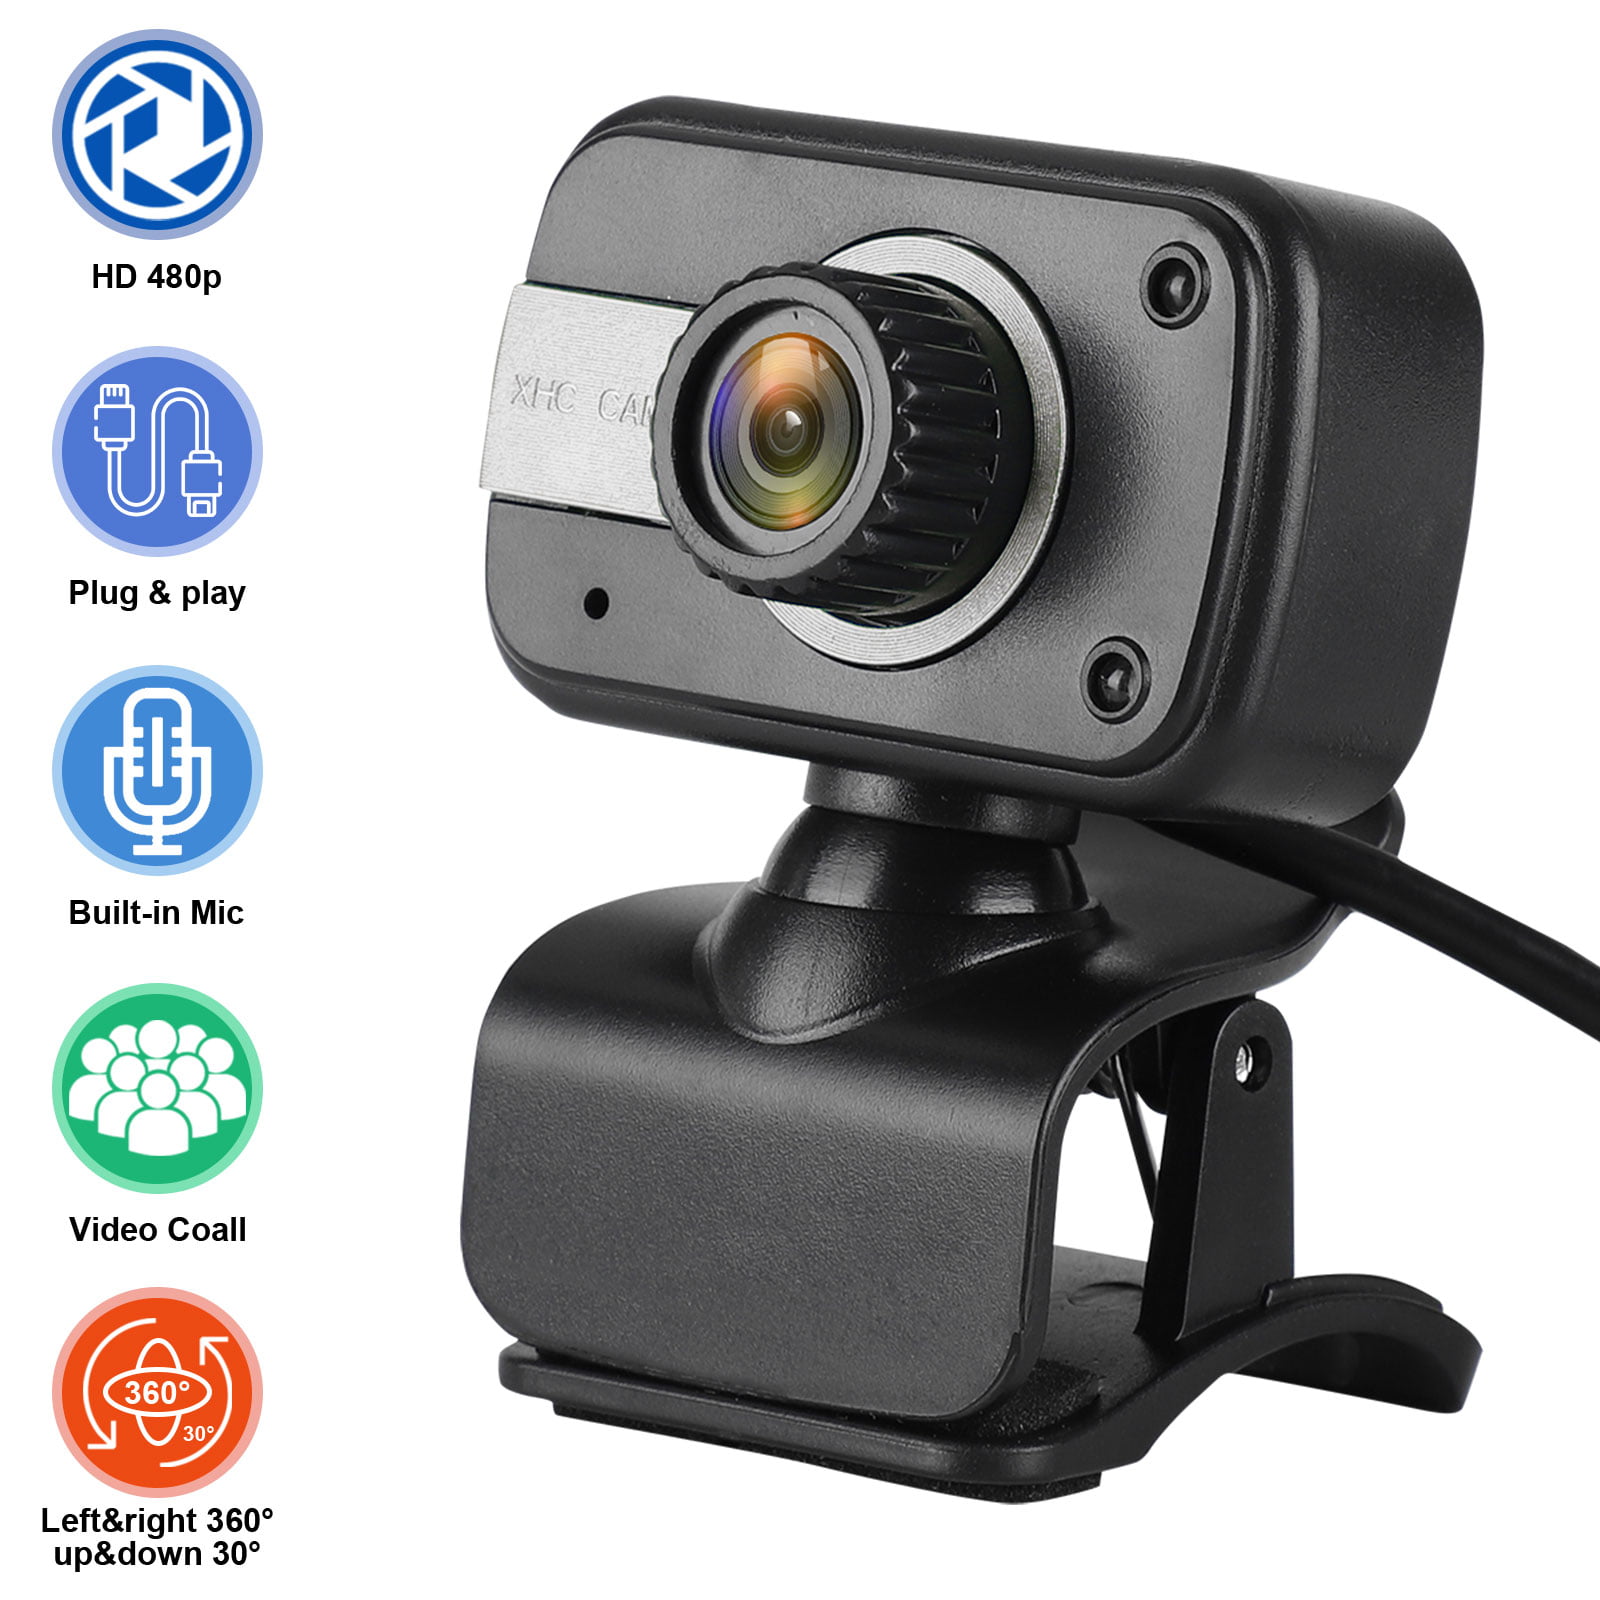 Full 1080P HD Webcam with Microphone, Computer Camera for Gaming Conferencing, Laptop Desktop Webcam, USB Face Cam fits for Mac YouTube Skype OBS, Free-Driver Installation Fast Autofocus